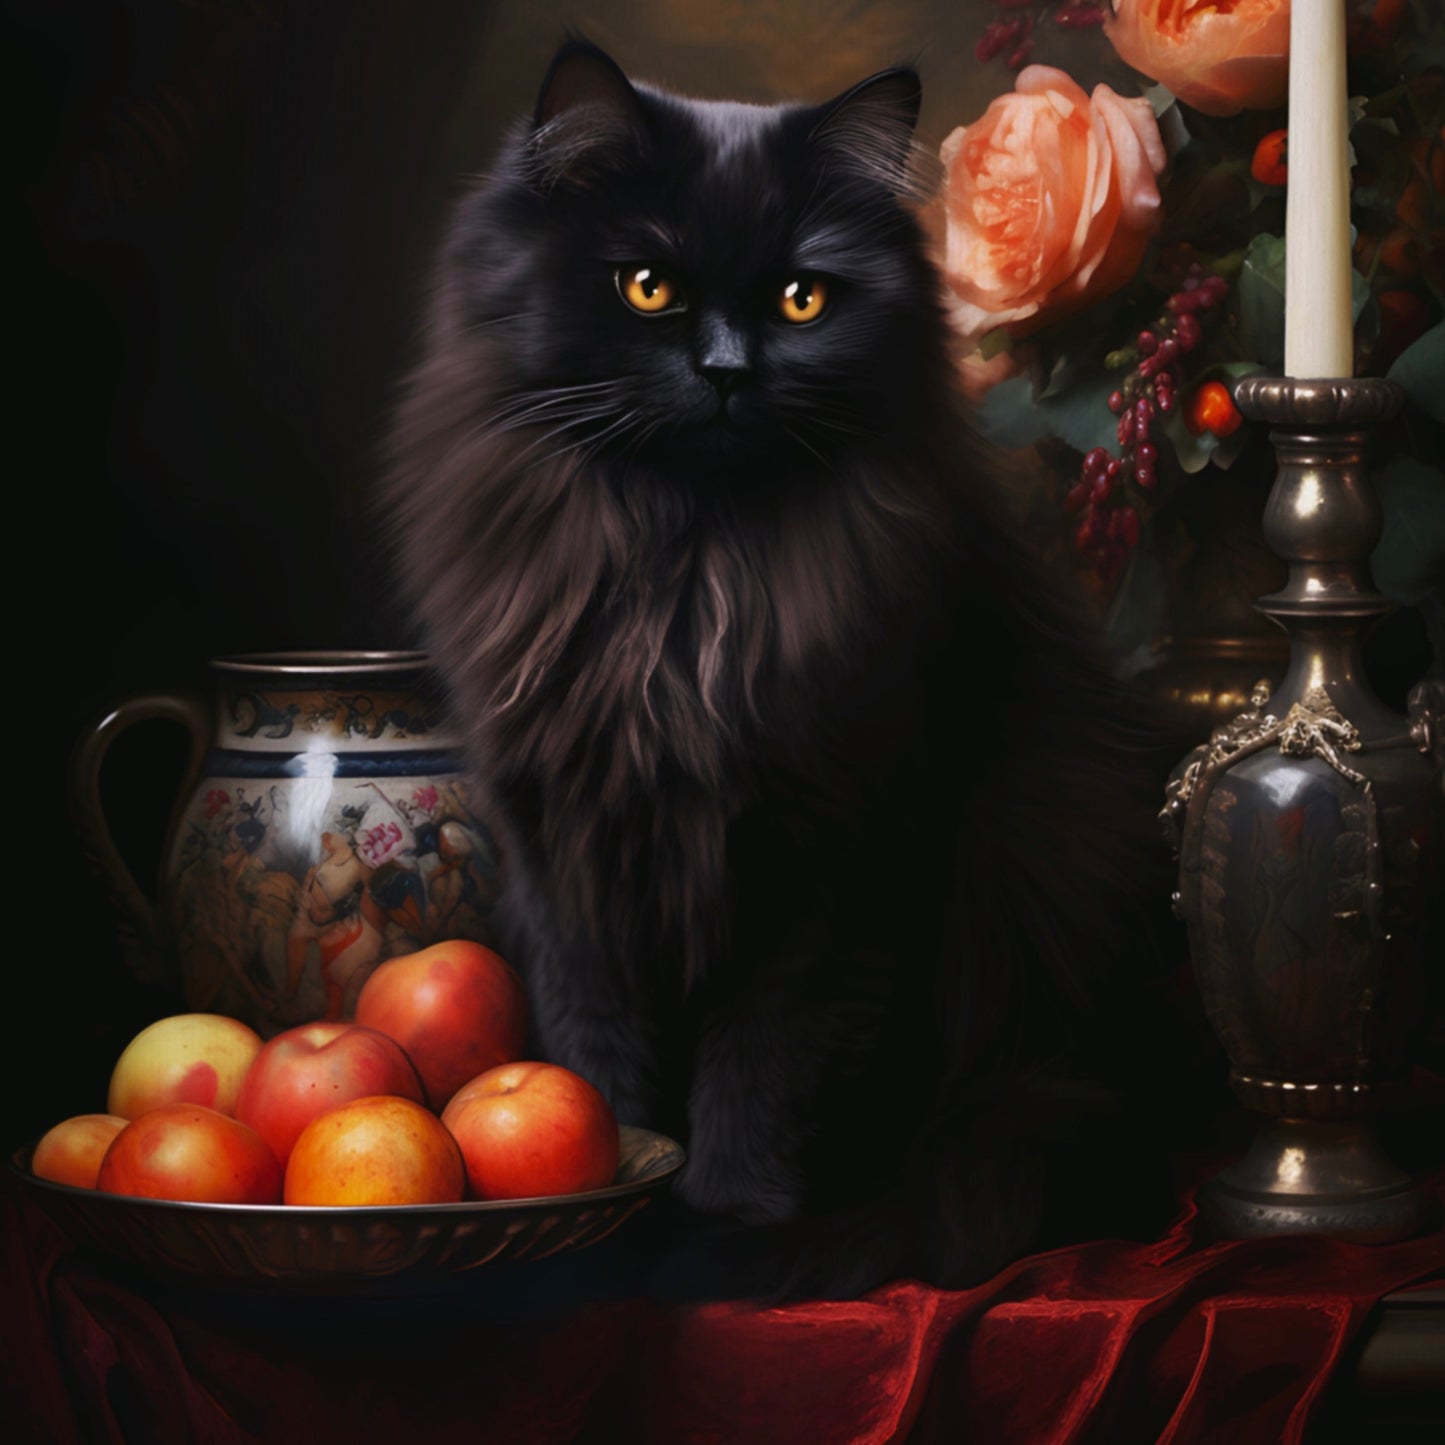 Black Persian with Fruit and Flowers